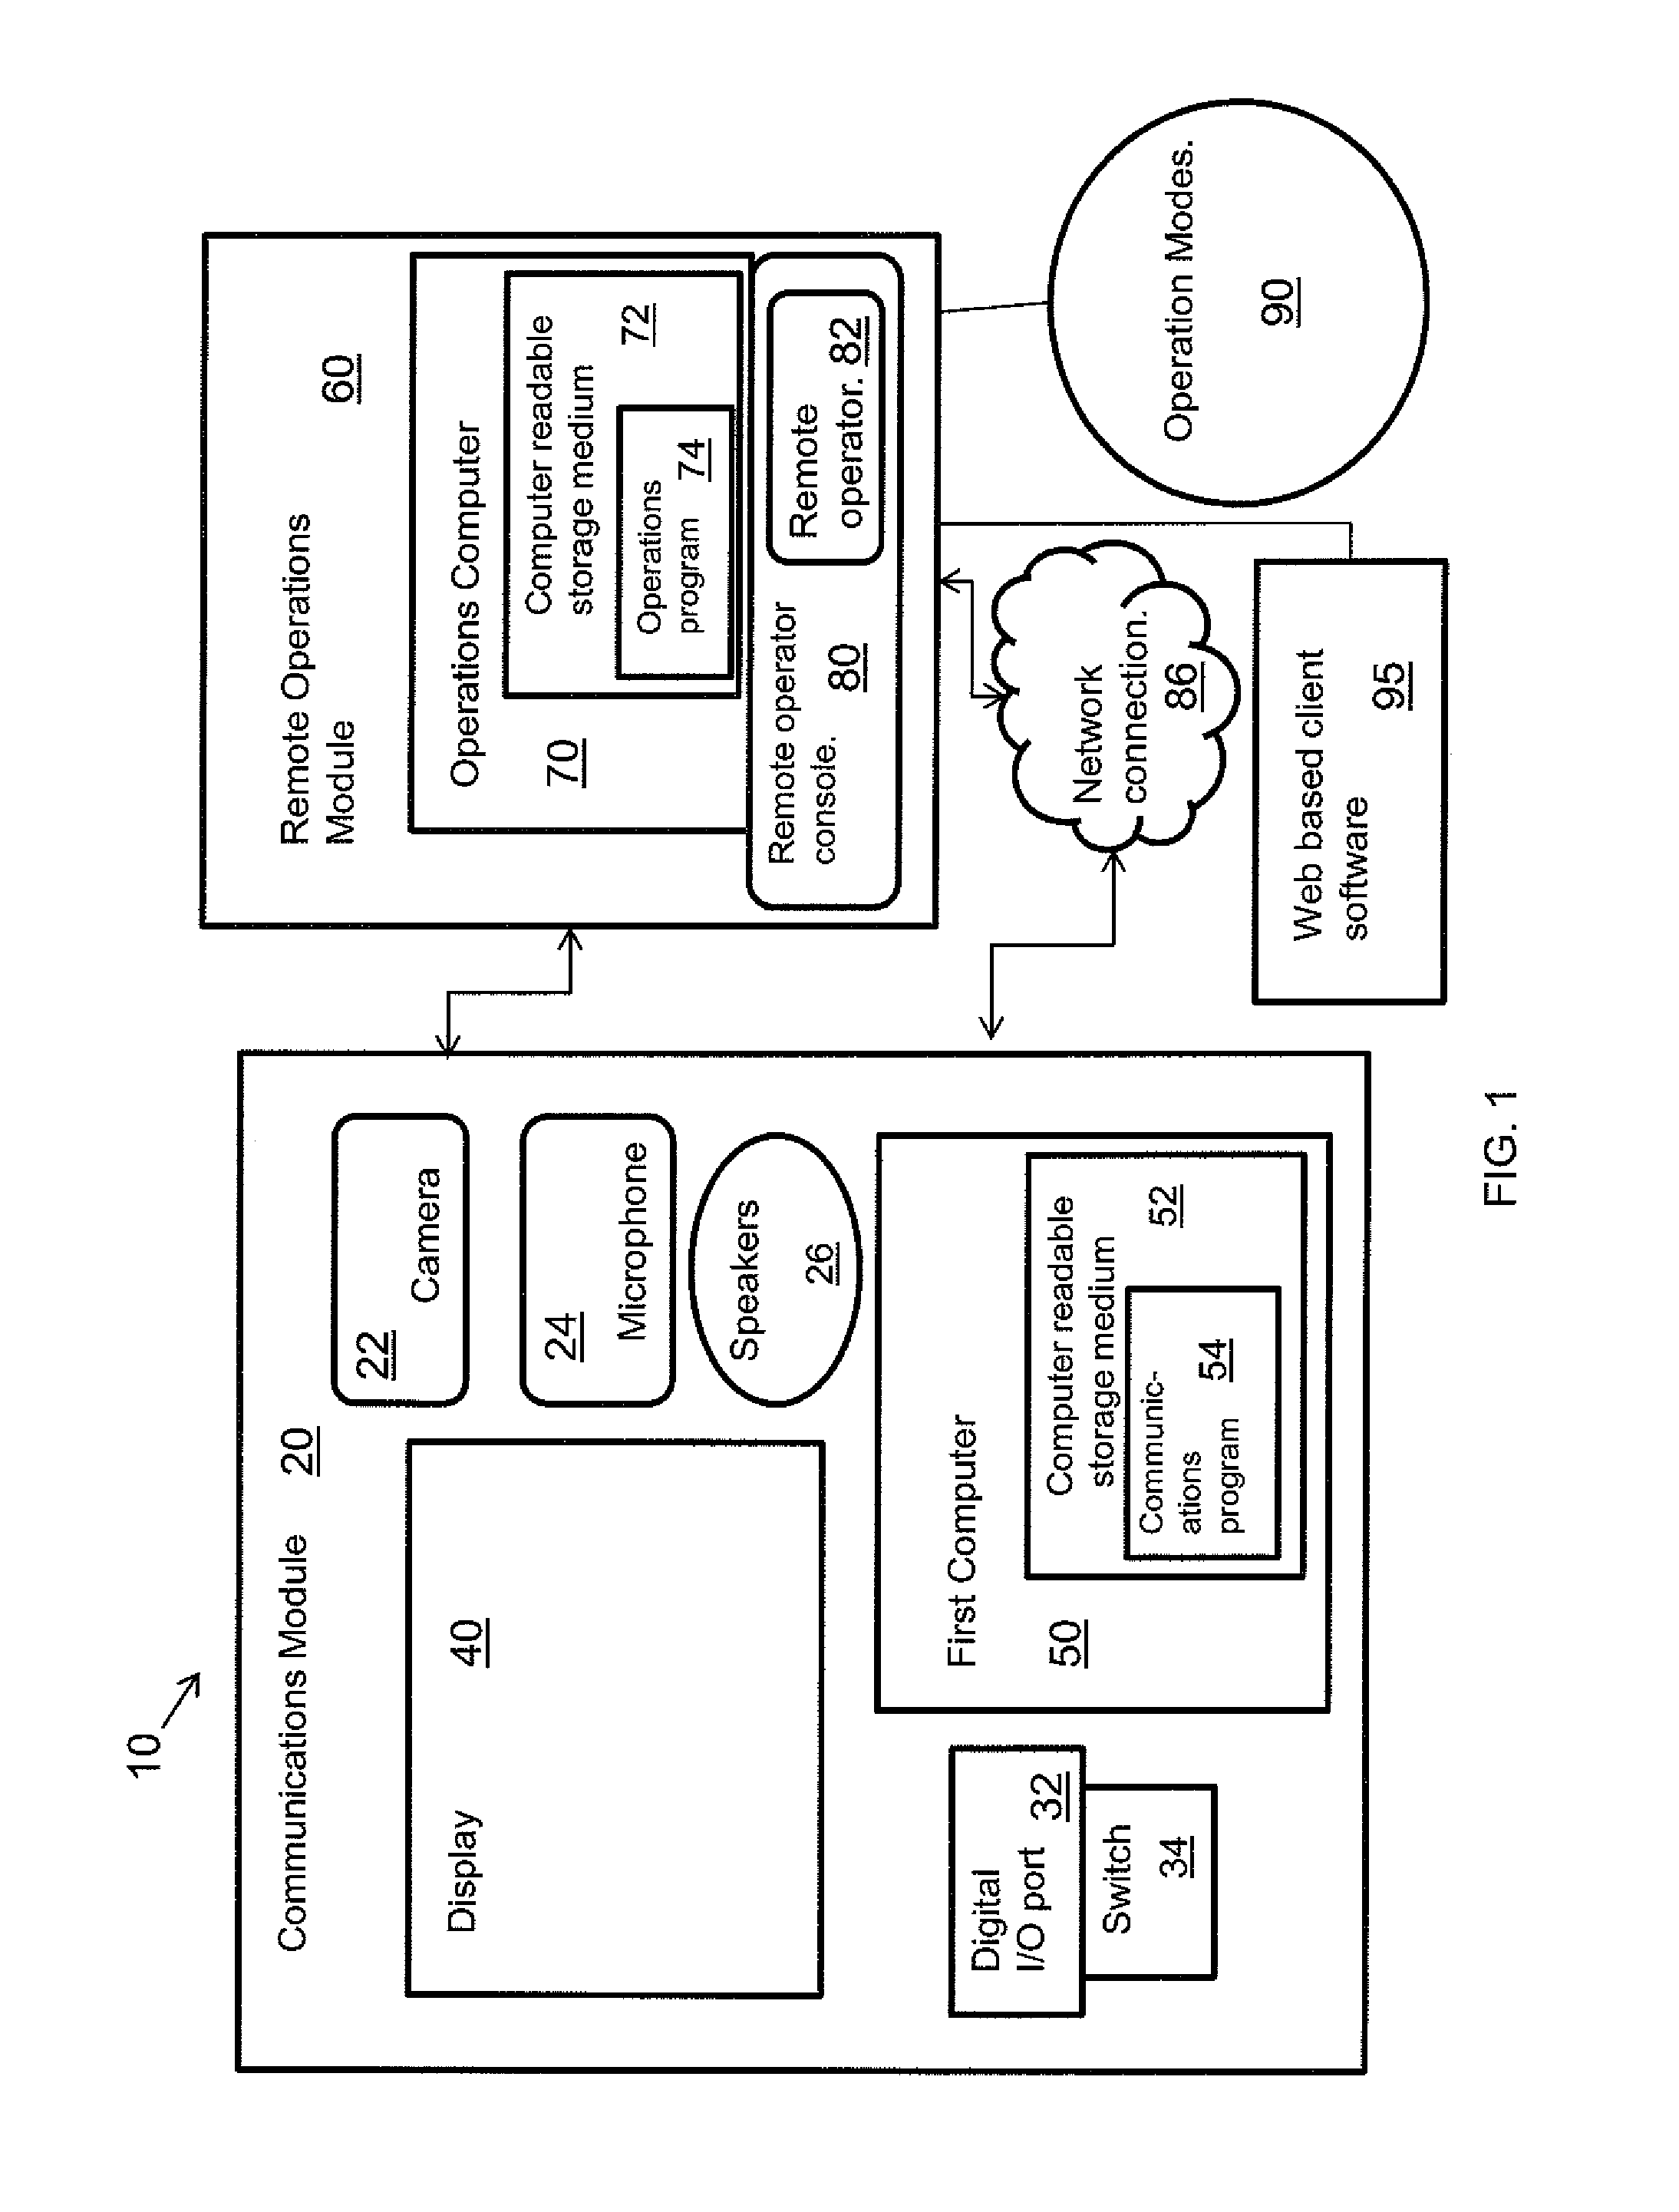 Video surveillance system and method with display advertising